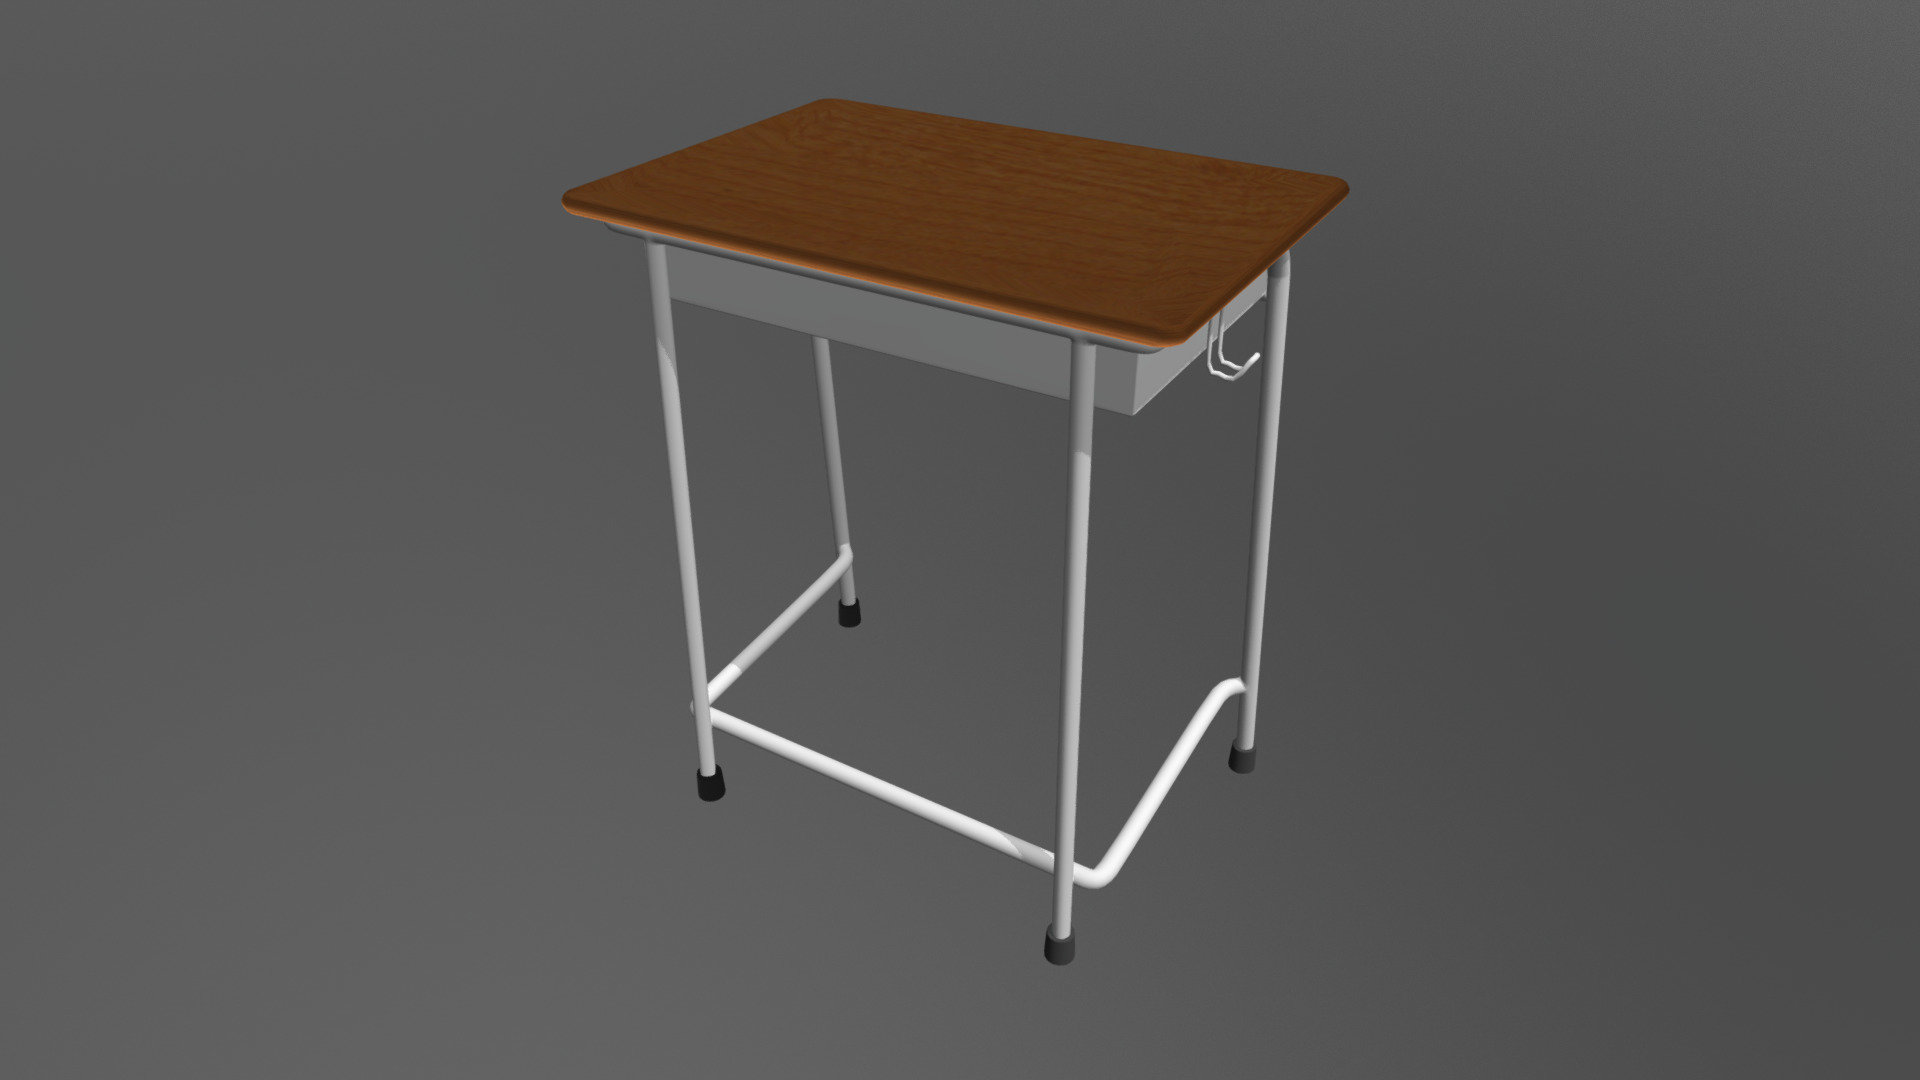 This is a Student desk in japanese school.
I used a boolean to weld the desk legs 3d model